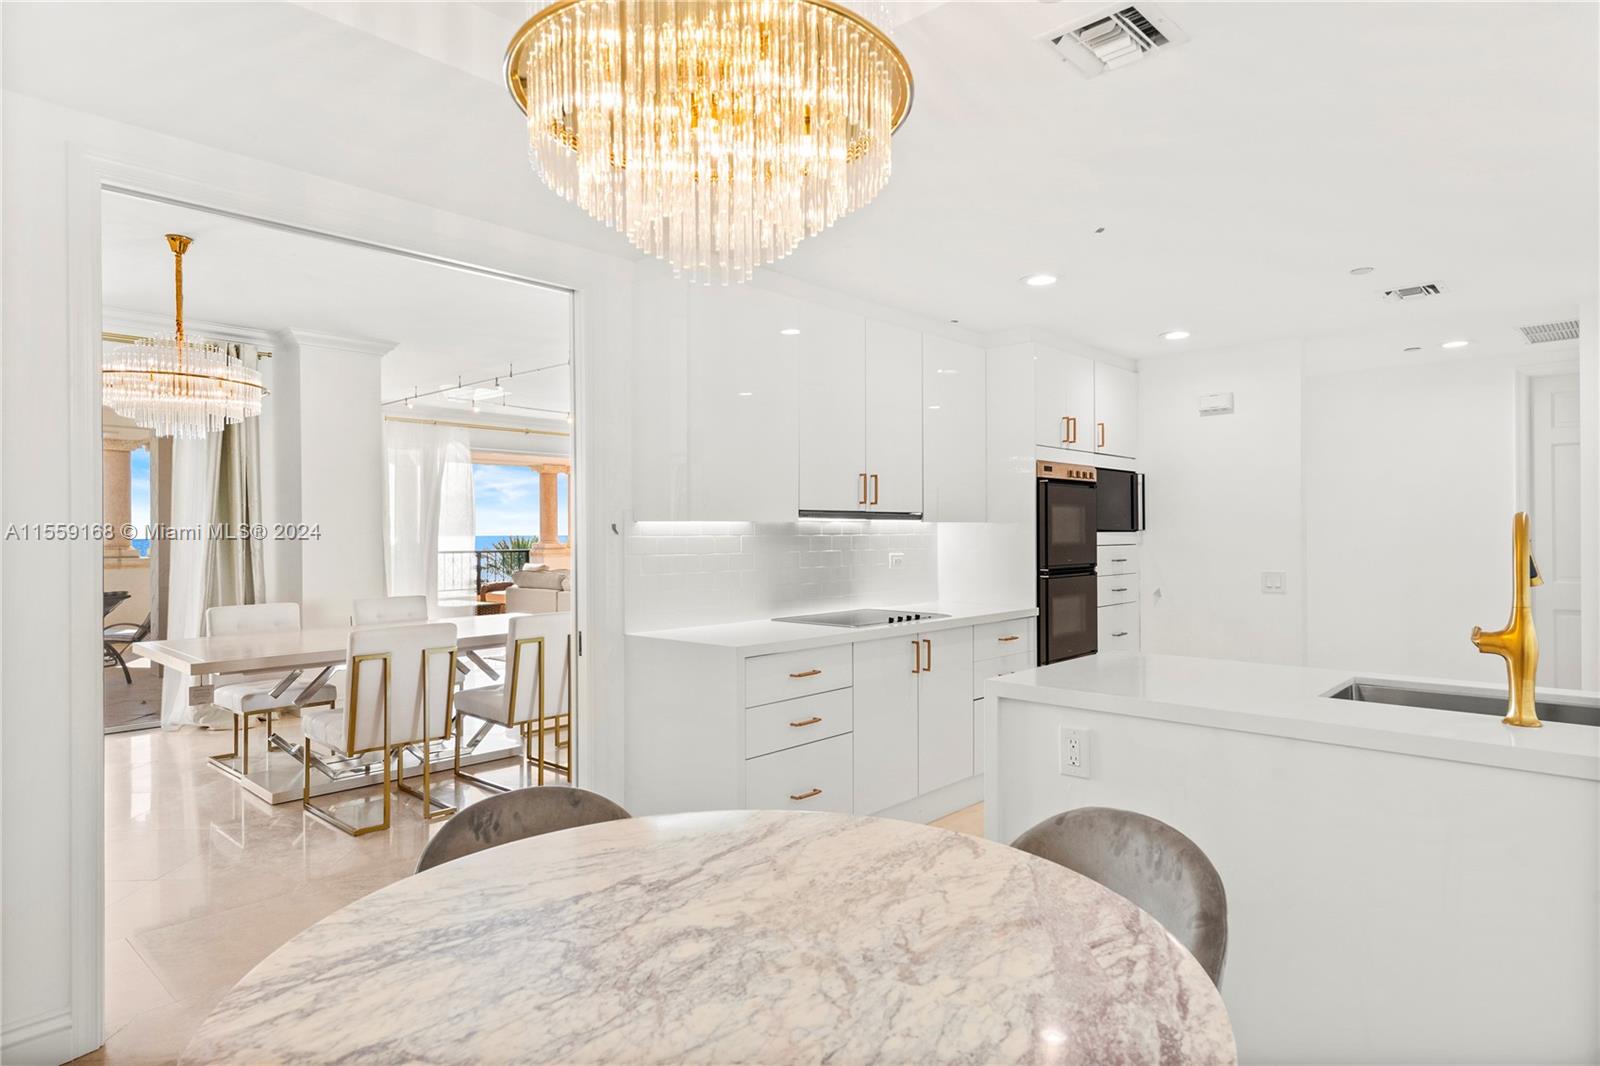 Enjoy open views of the beach & Atlantic Ocean from this newly remodeled 4th flr 3BR/3+1BA oceanfront residence. Features +/-2,858 SF, exquisite stone and white carpet floors, beautiful custom decor, open living room & family area w/ balcony. Chef's kitchen w/top appliances & adj private eat-in dining area. Principle suite features a terrace & fascinating ocean views. Dazzling master bath offers a sunken tub, glass rain shower & gold fixtures. A full-length balcony w/beach & ocean views.